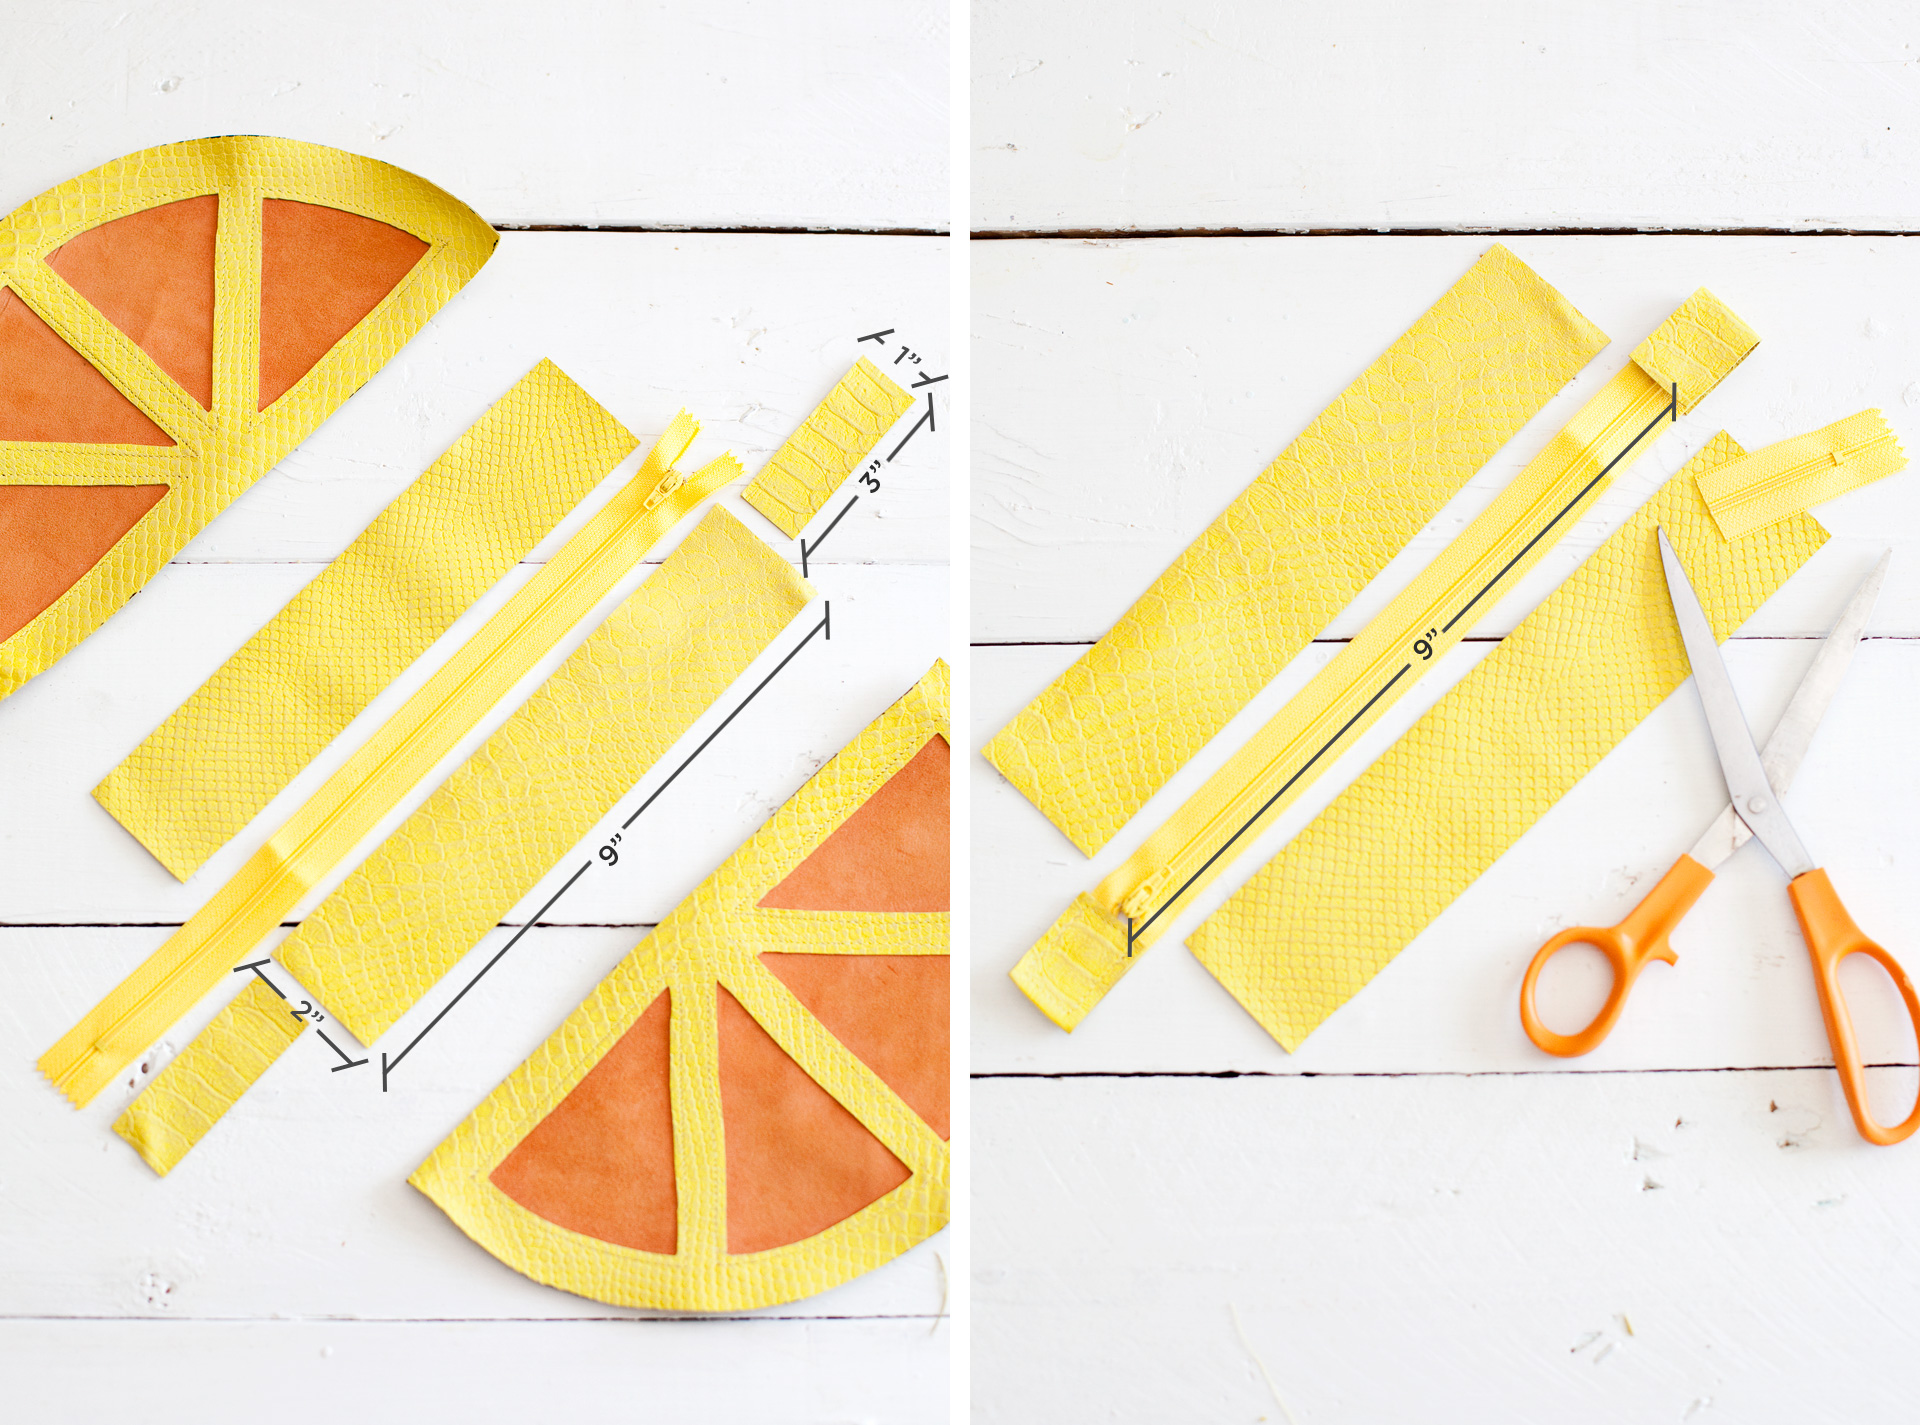 DIY Citrus Slice purse- complete with sewing template and detailed instructions!